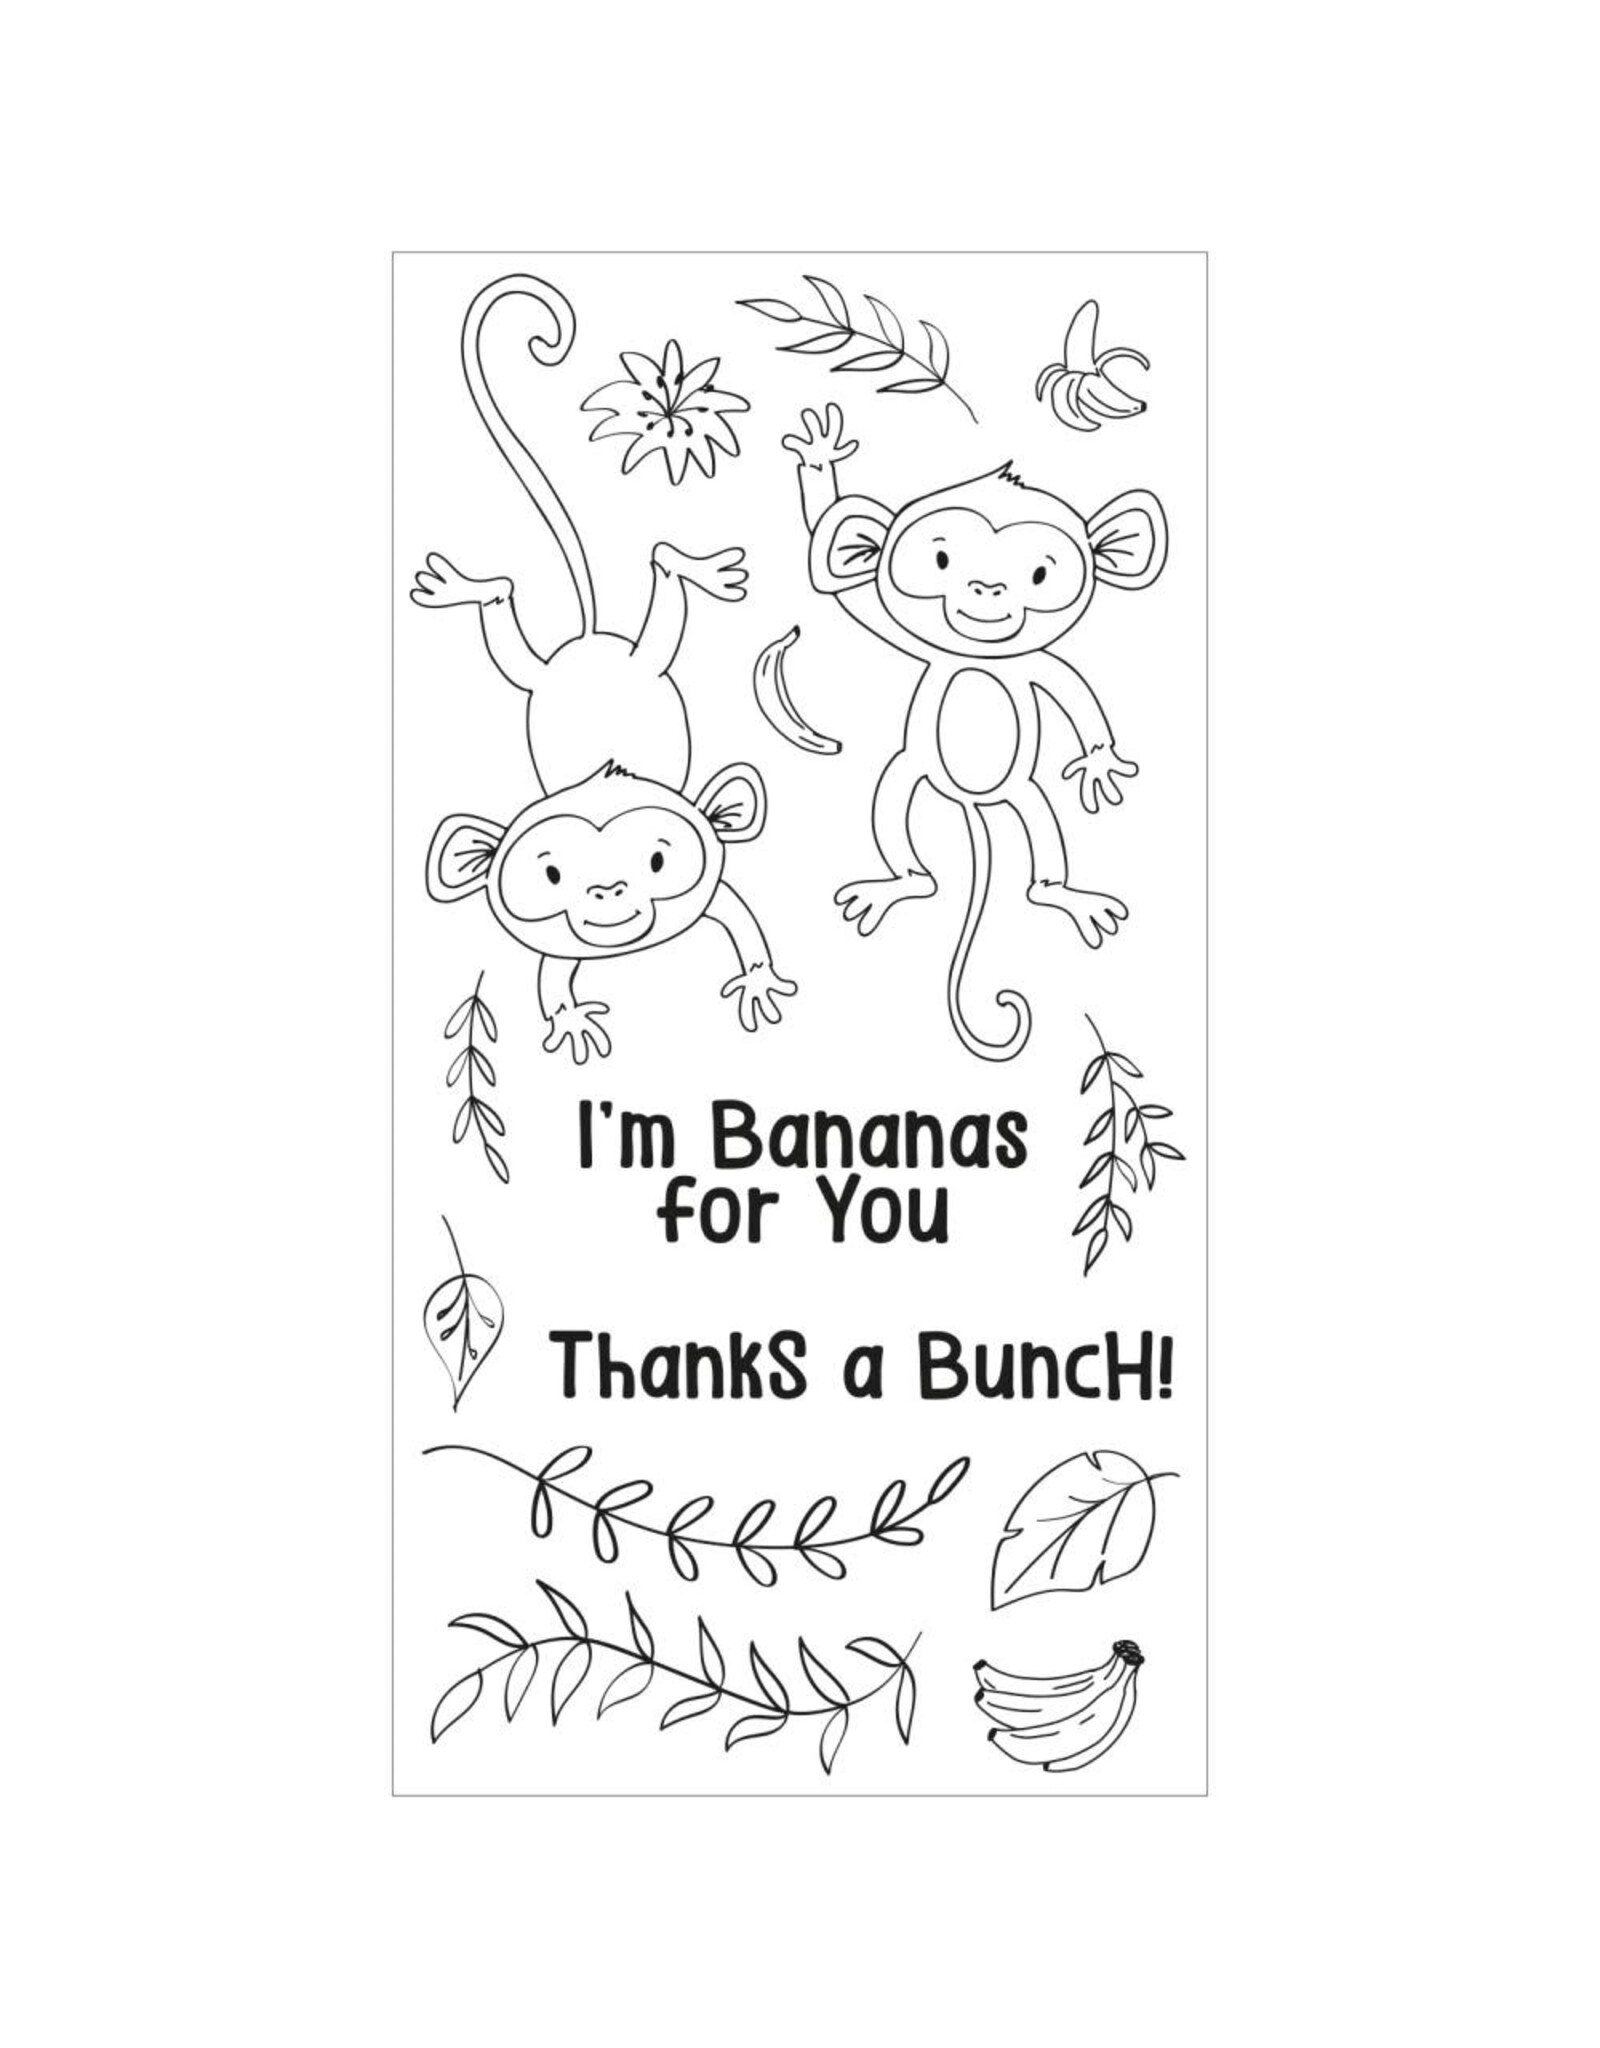 SIZZIX SIZZIX CATHERINE POOLER DESIGNS GOING BANANAS CLEAR STAMP SET